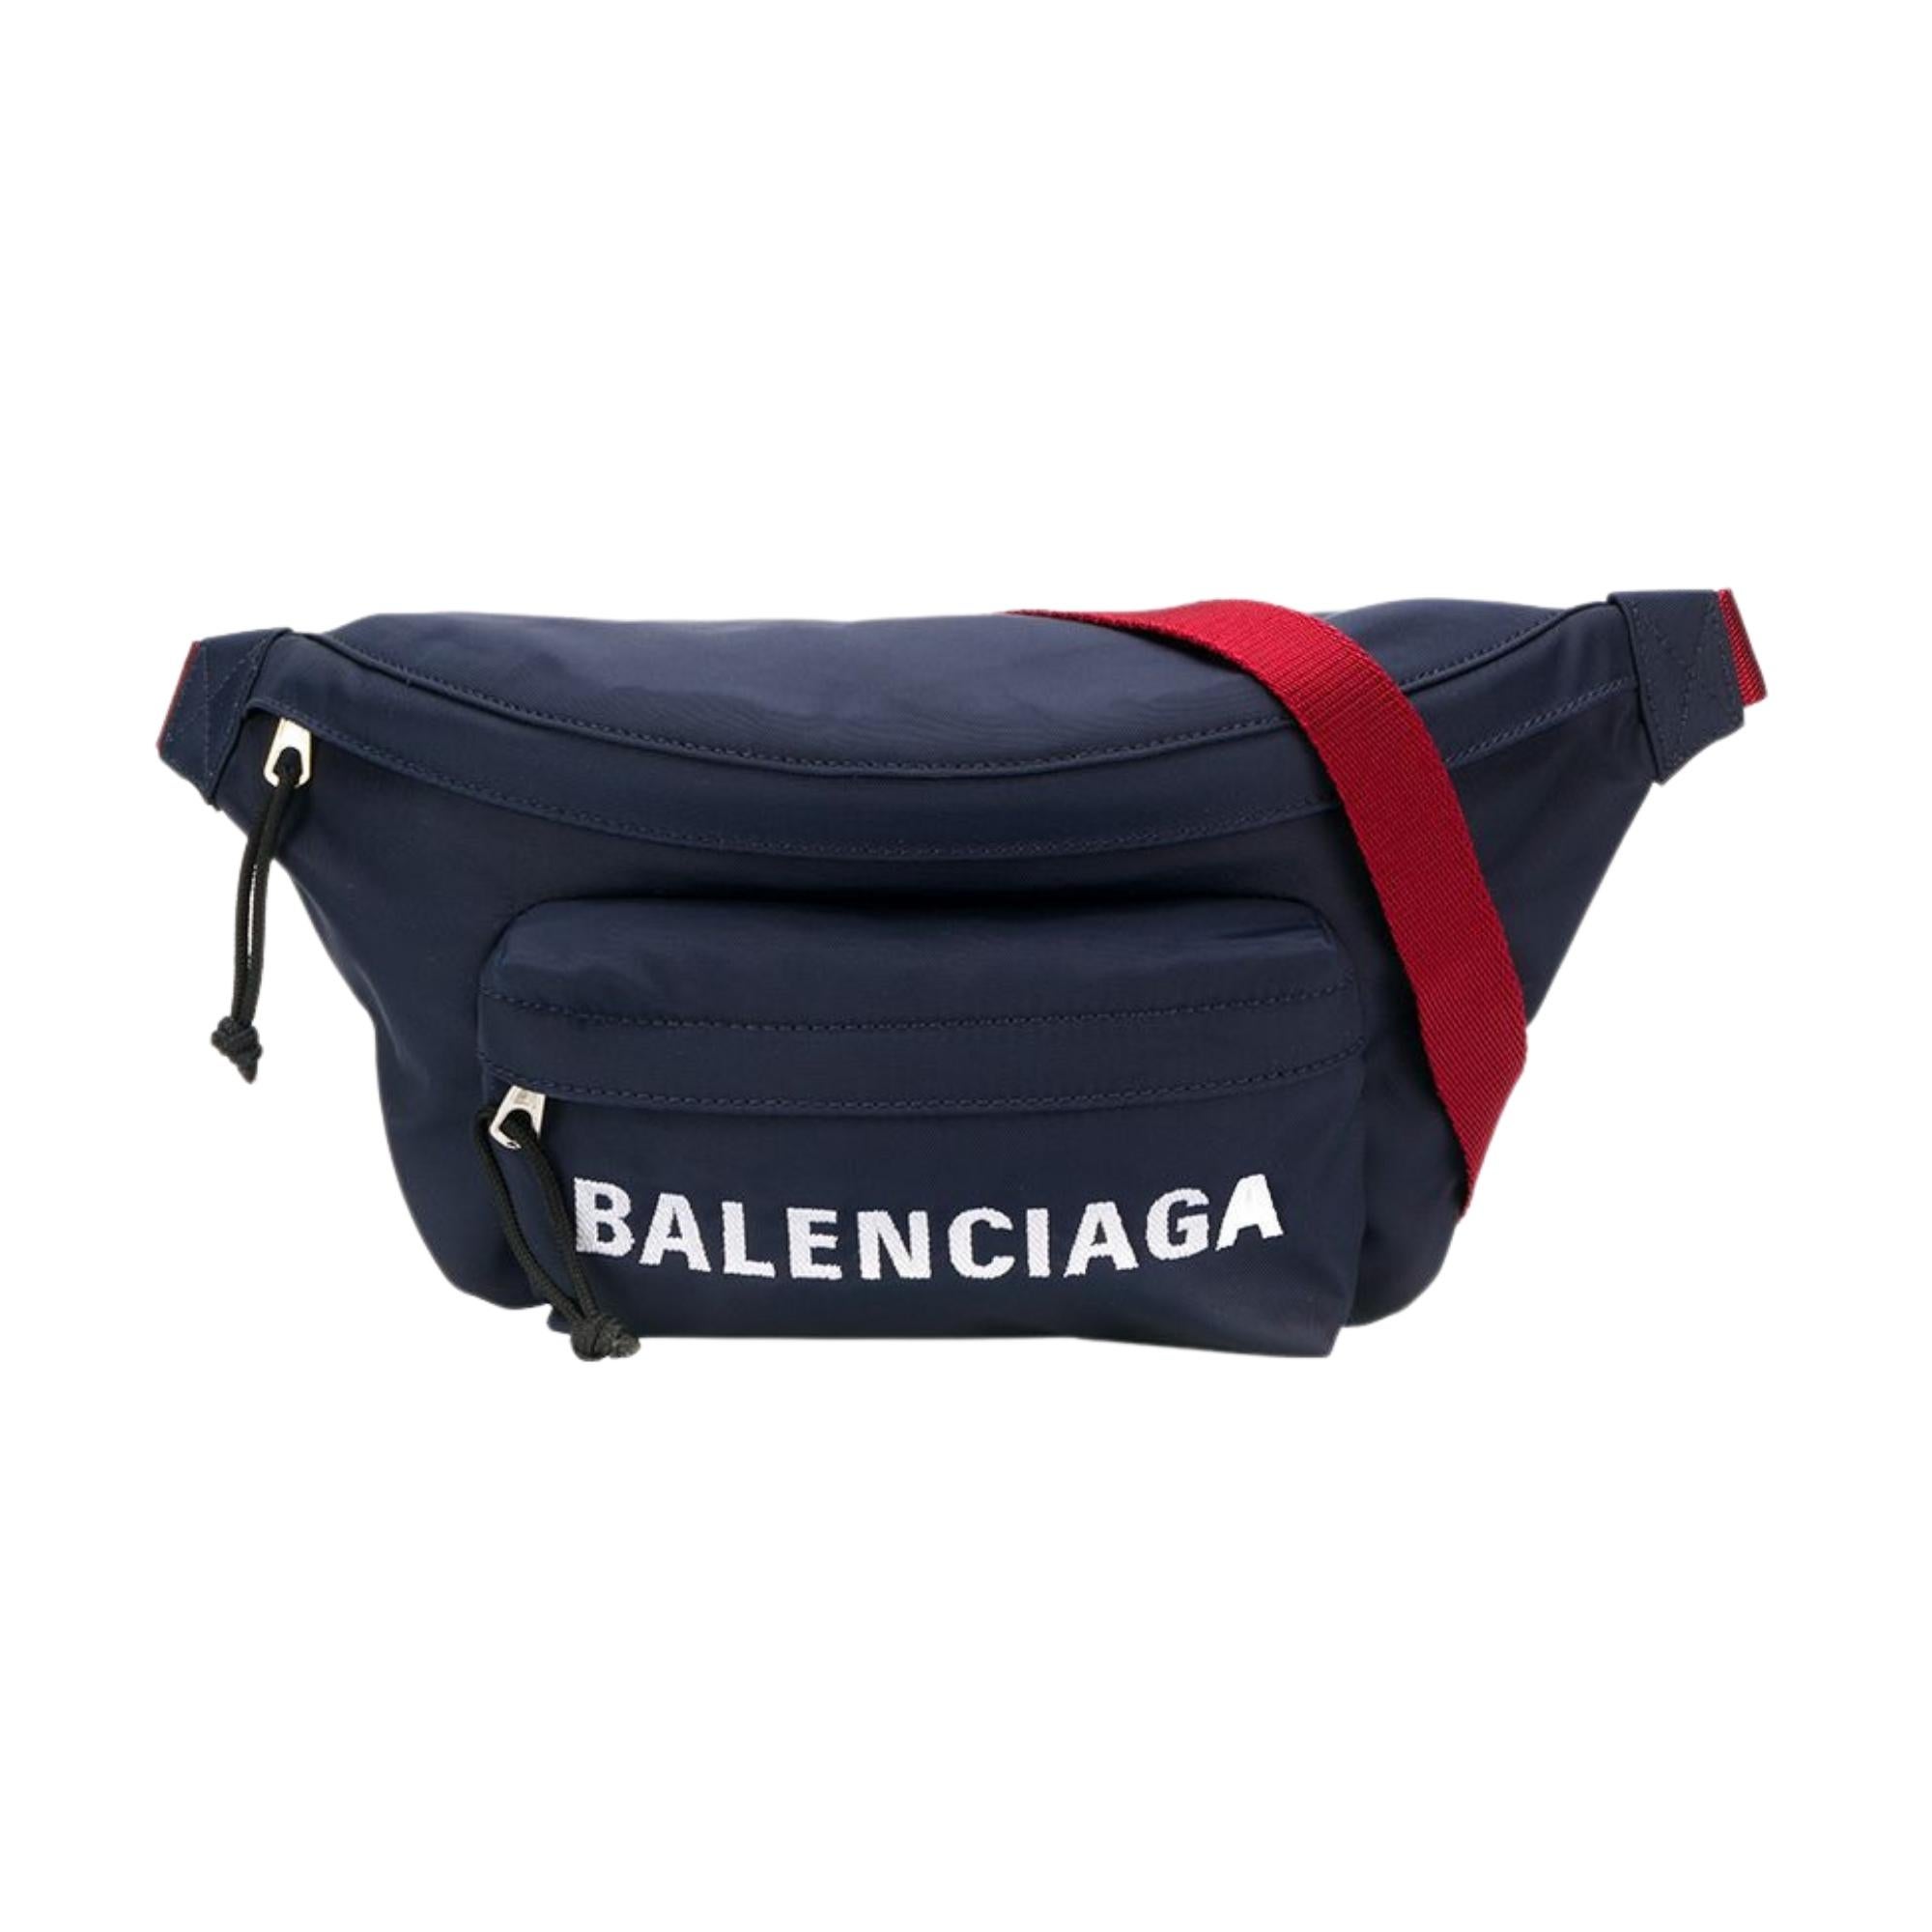 The fanny pack features a navy polyester exterior, a red woven fabric adjustable belt, an embroidered logo on the front pocket and two compartments with zip closure.

COLOR: Navy blue
MATERIAL: Polyester
ITEM CODE: 533009 HPG1X
MEASURES: H 5.9” x L